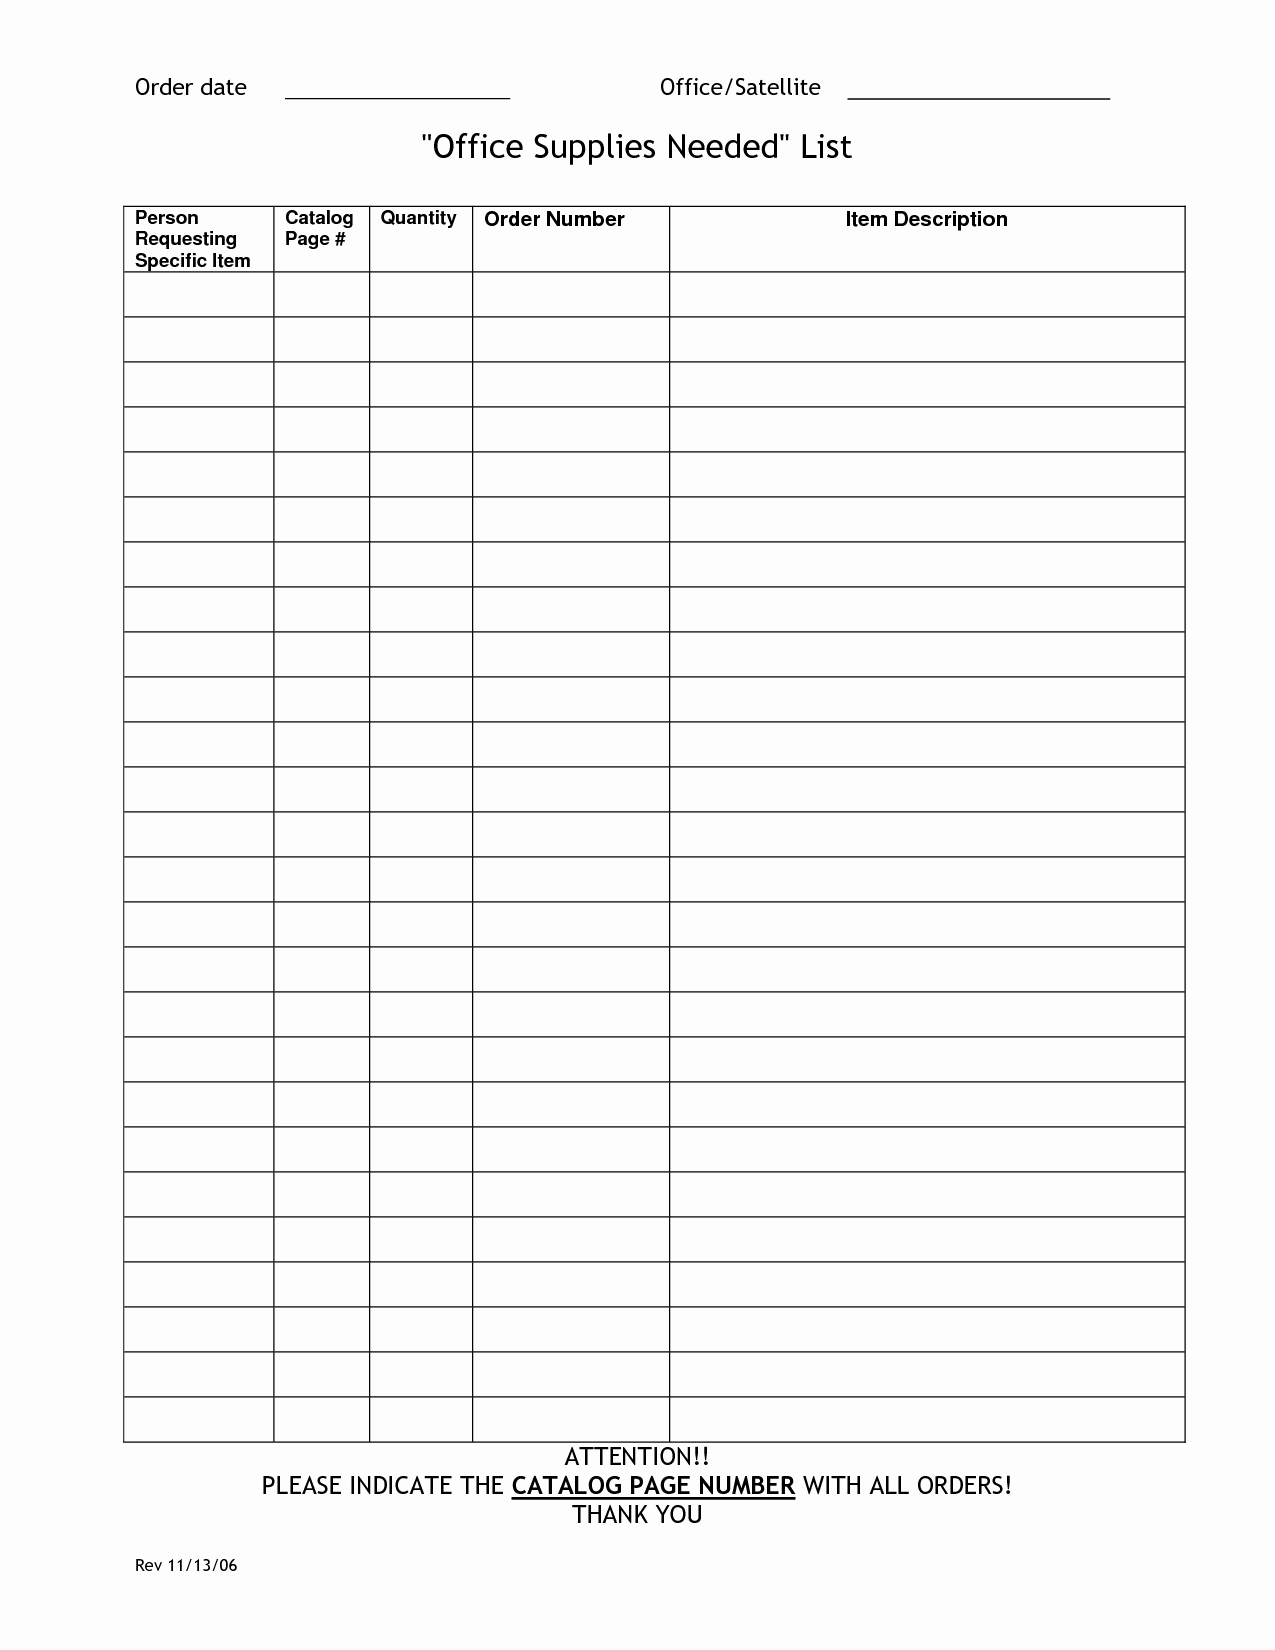 Office Supply order form Template Fresh Fice Supply Checklist Templates for Your Business Violeet